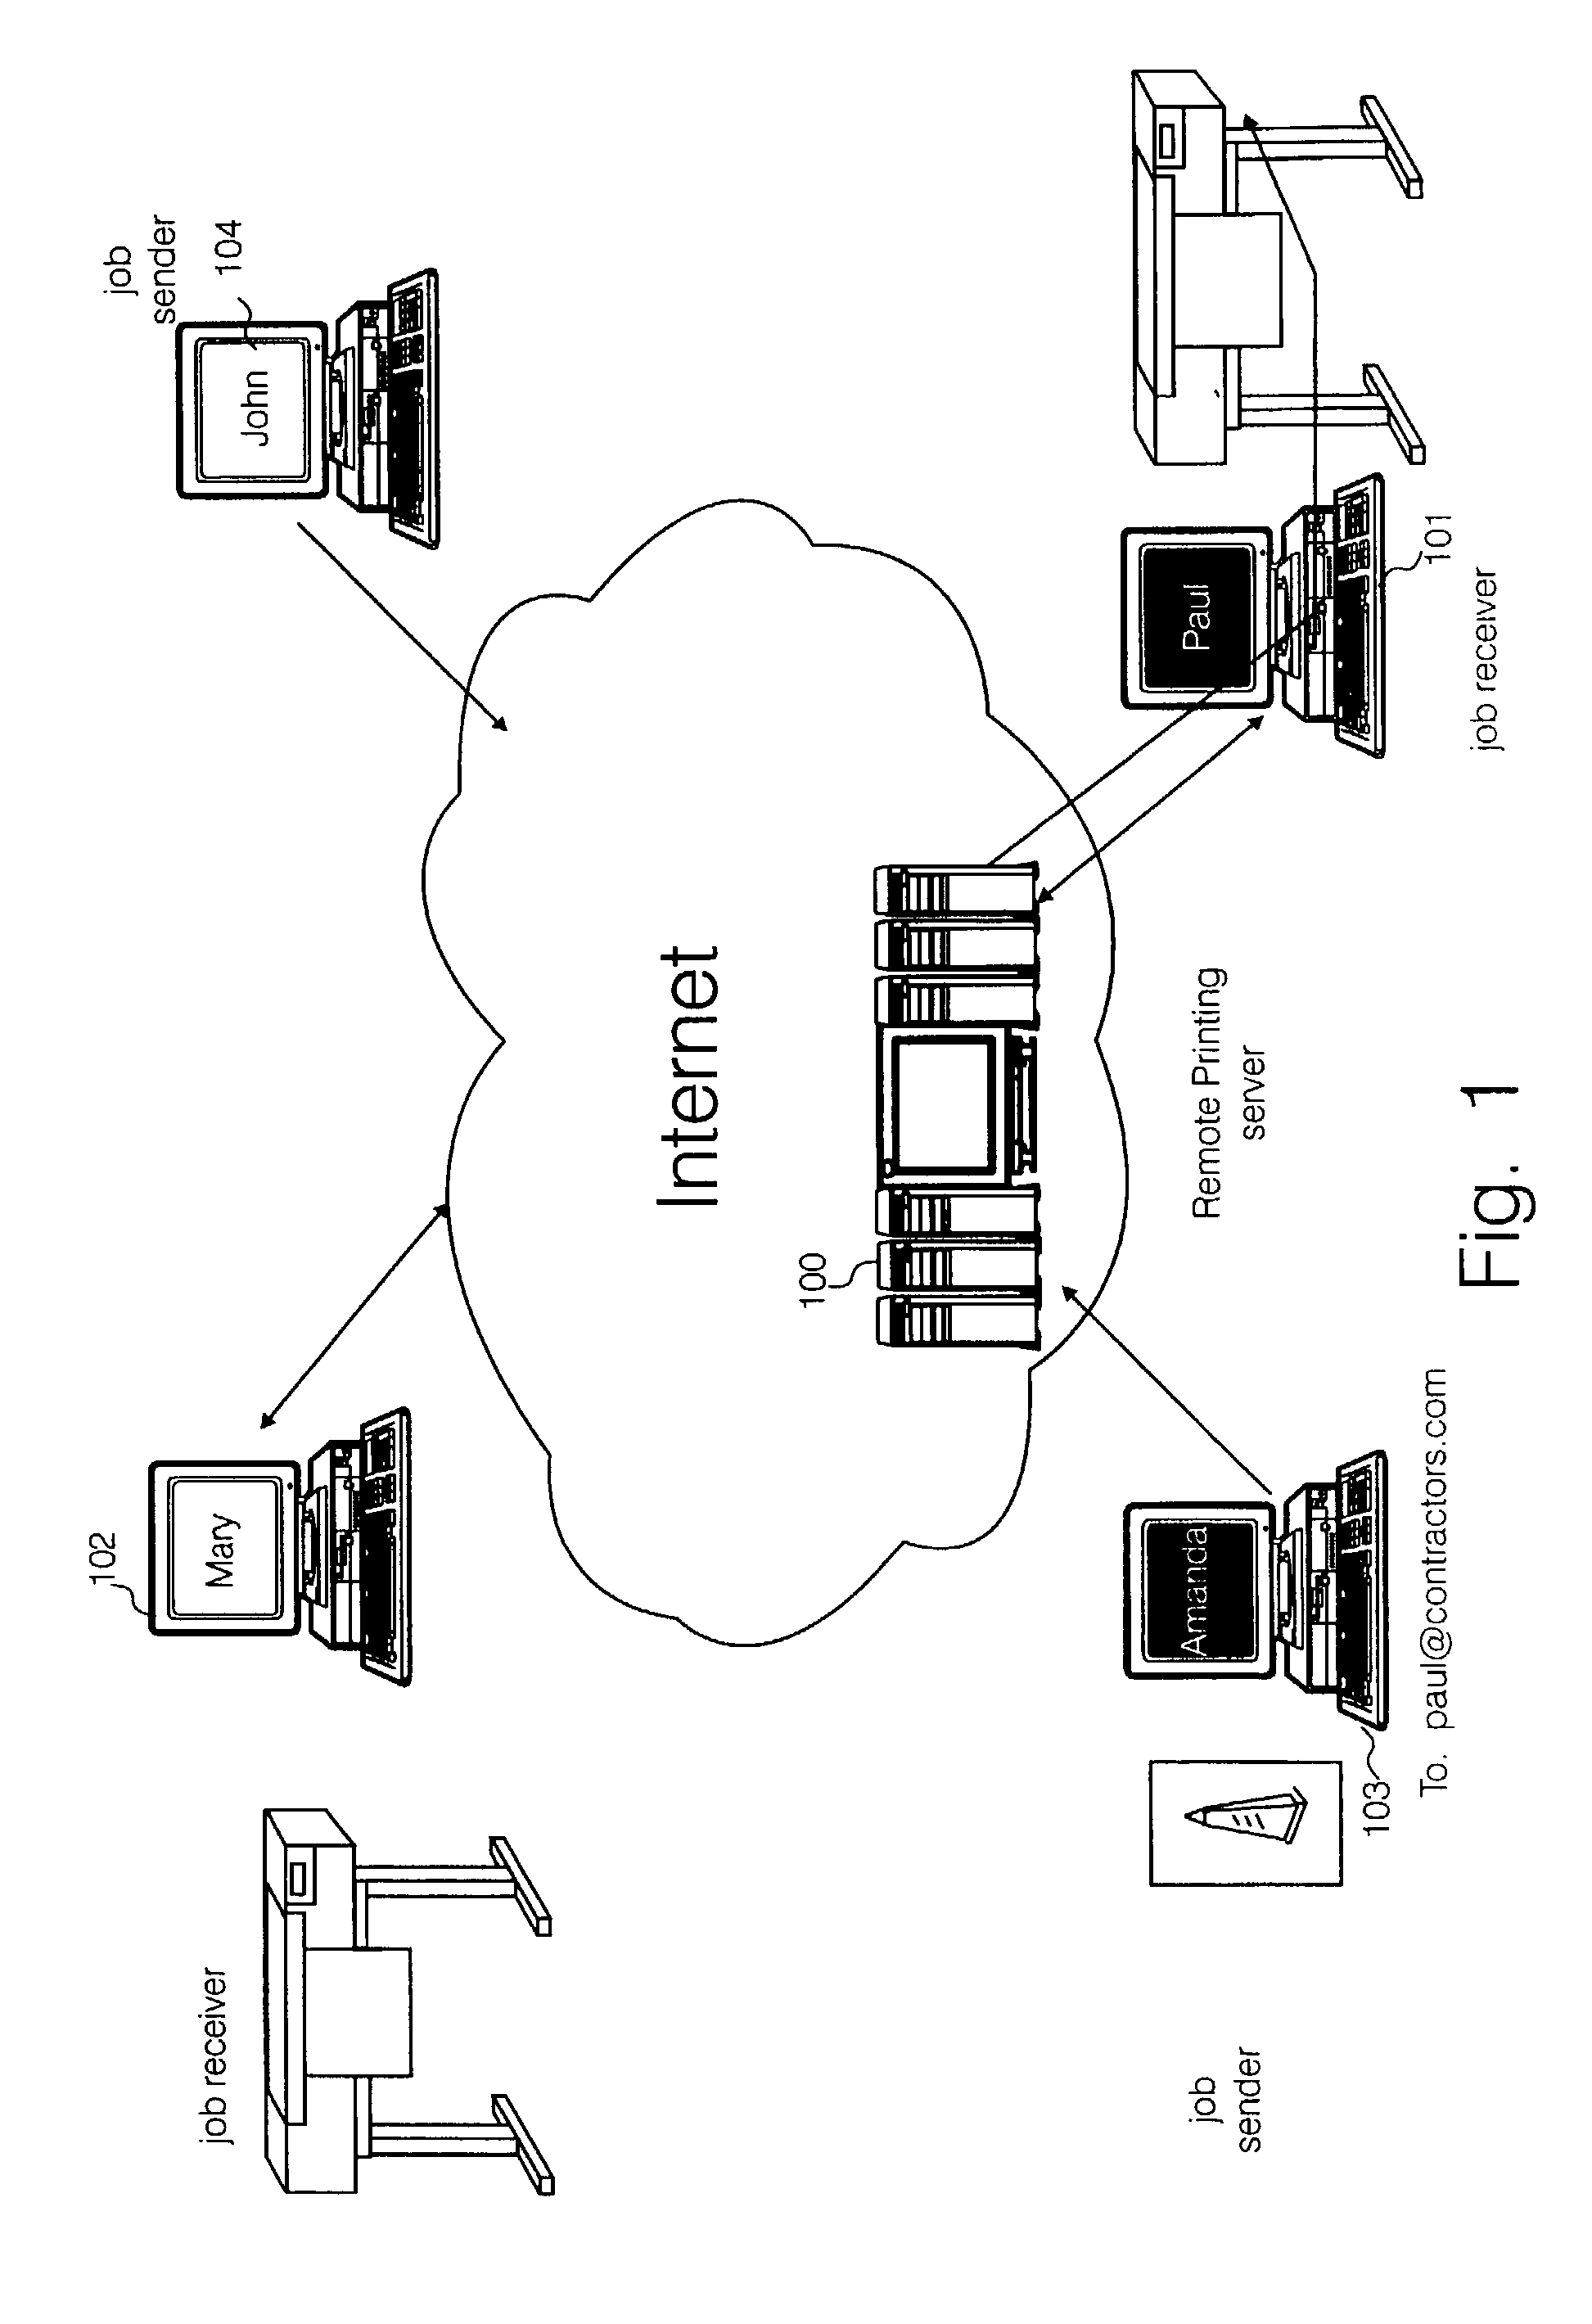 Automatic registration of receiving device on a remote printing application